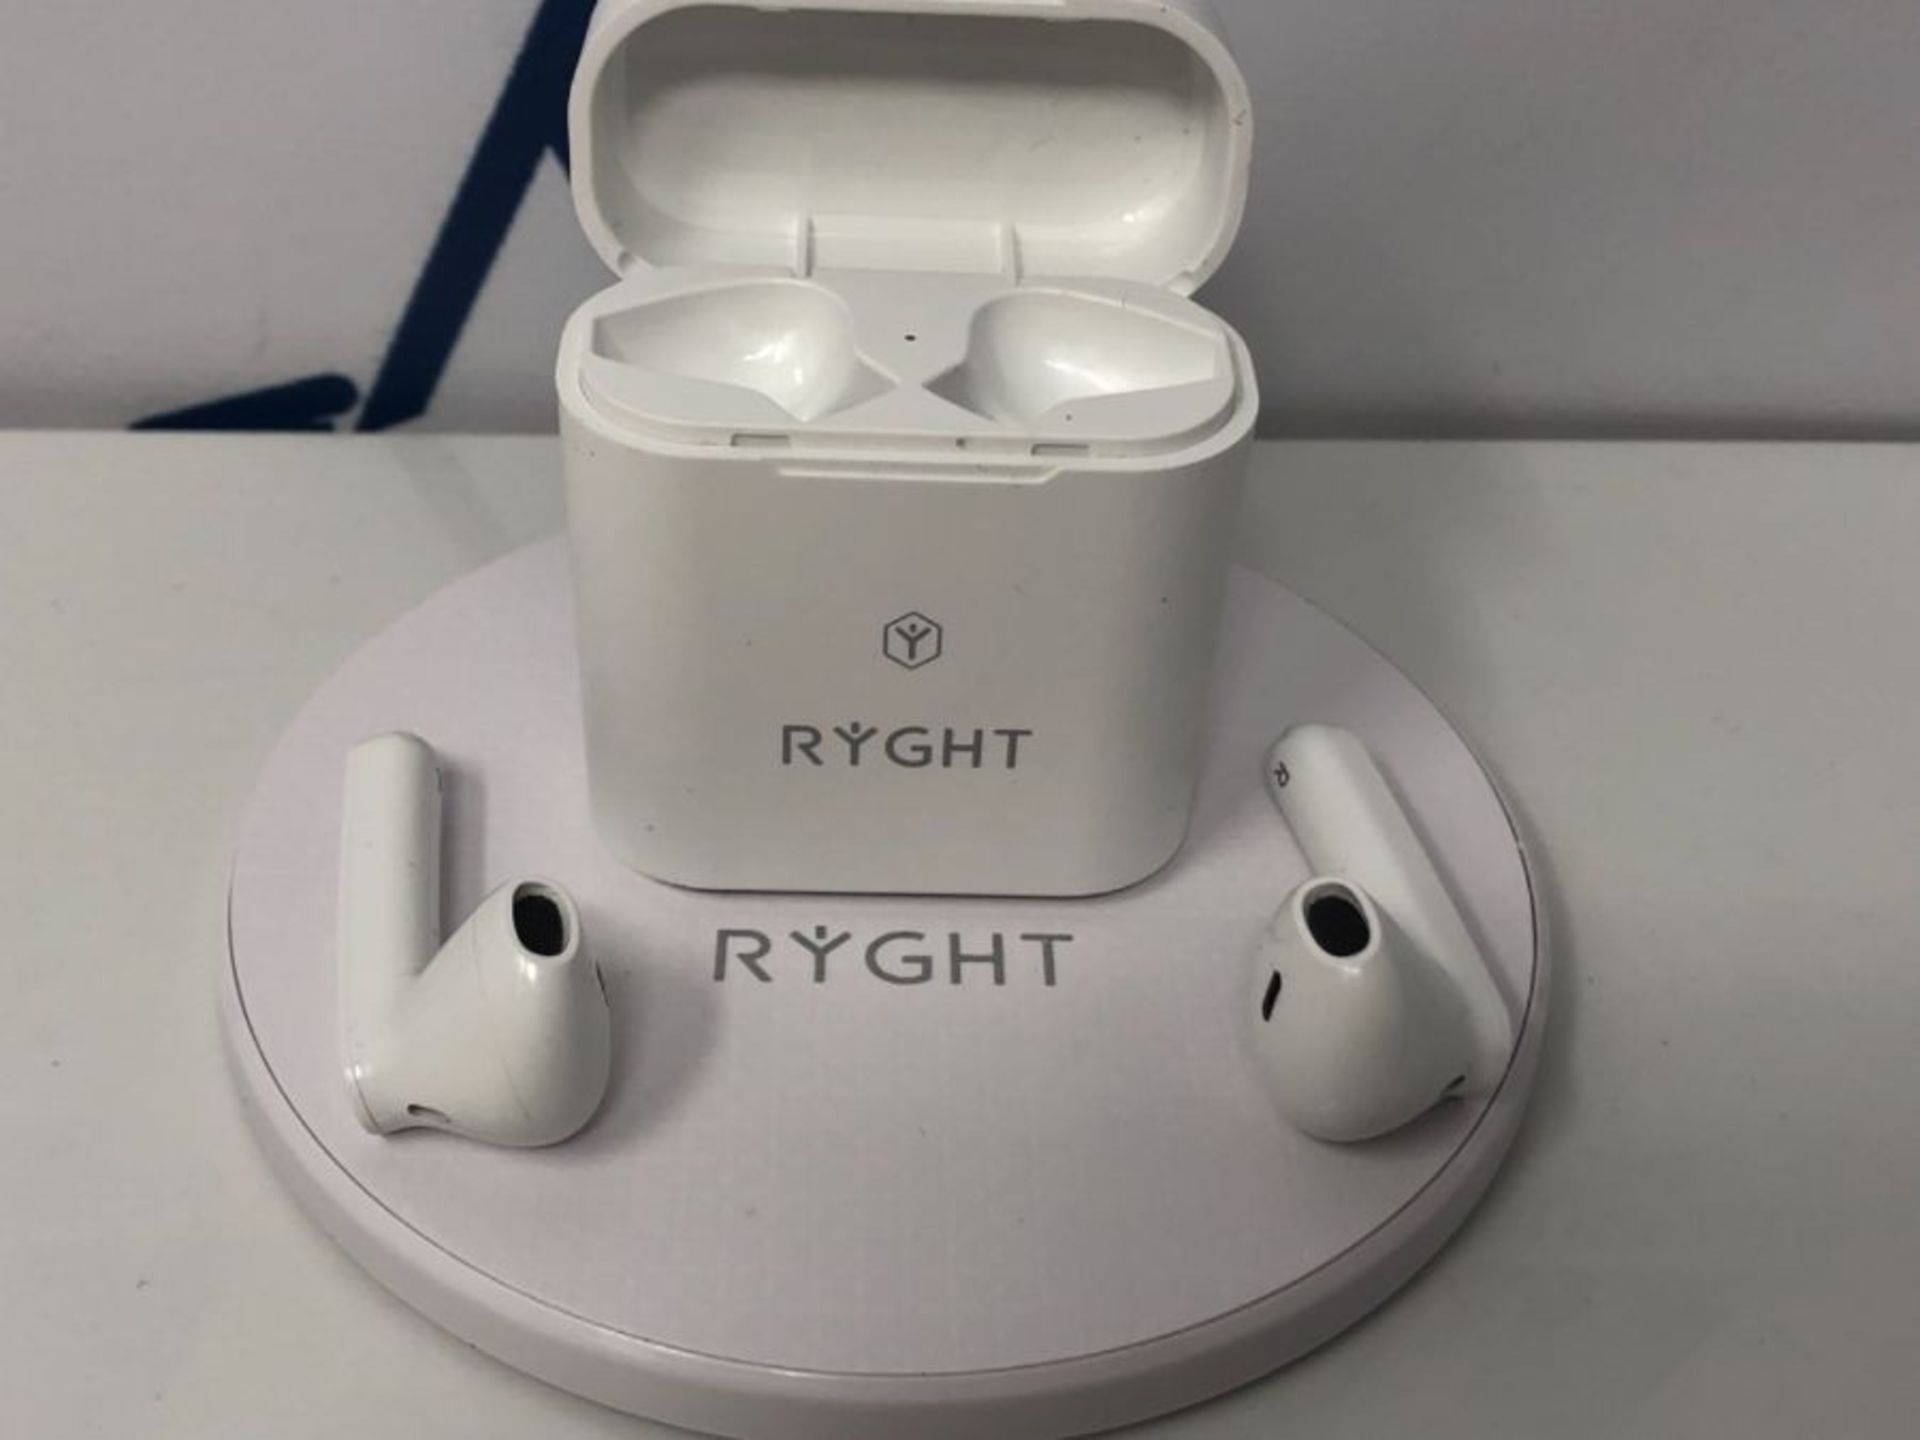 RYGHT Jam+ R480316 Wireless Headphones + Induction Charger - White - Image 3 of 3